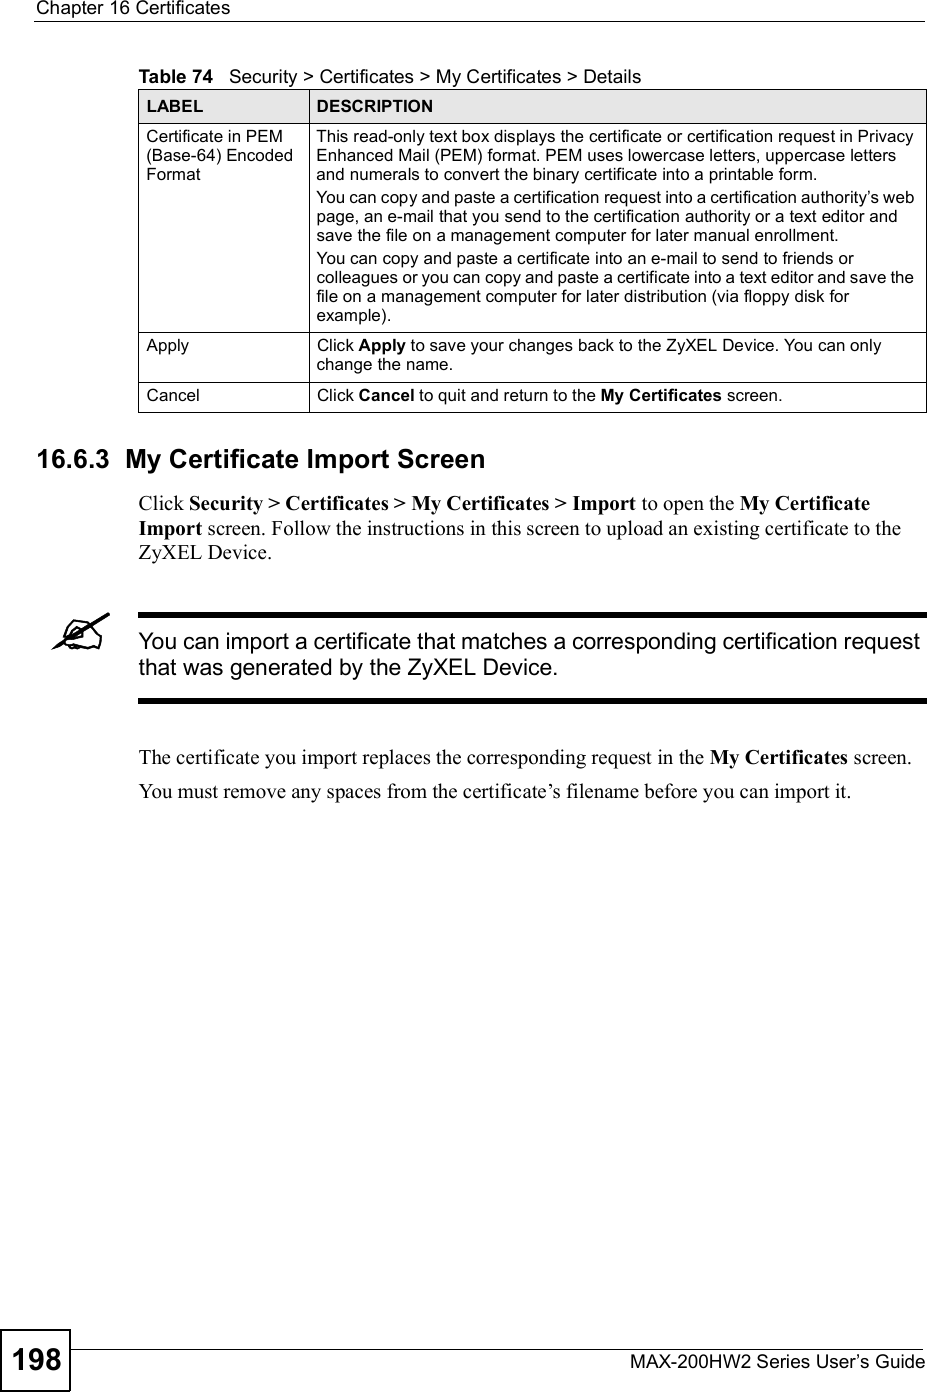 Chapter 16CertificatesMAX-200HW2 Series User s Guide19816.6.3  My Certificate Import Screen Click Security &gt; Certificates &gt; My Certificates &gt; Import to open the My Certificate Import screen. Follow the instructions in this screen to upload an existing certificate to the ZyXEL Device. You can import a certificate that matches a corresponding certification request that was generated by the ZyXEL Device. The certificate you import replaces the corresponding request in the My Certificates screen.You must remove any spaces from the certificate!s filename before you can import it.Certificate in PEM (Base-64) Encoded FormatThis read-only text box displays the certificate or certification request in Privacy Enhanced Mail (PEM) format. PEM uses lowercase letters, uppercase letters and numerals to convert the binary certificate into a printable form. You can copy and paste a certification request into a certification authority s web page, an e-mail that you send to the certification authority or a text editor and save the file on a management computer for later manual enrollment.You can copy and paste a certificate into an e-mail to send to friends or colleagues or you can copy and paste a certificate into a text editor and save the file on a management computer for later distribution (via floppy disk for example).ApplyClick Apply to save your changes back to the ZyXEL Device. You can only change the name.CancelClick Cancel to quit and return to the My Certificates screen.Table 74   Security &gt; Certificates &gt; My Certificates &gt; DetailsLABEL DESCRIPTION